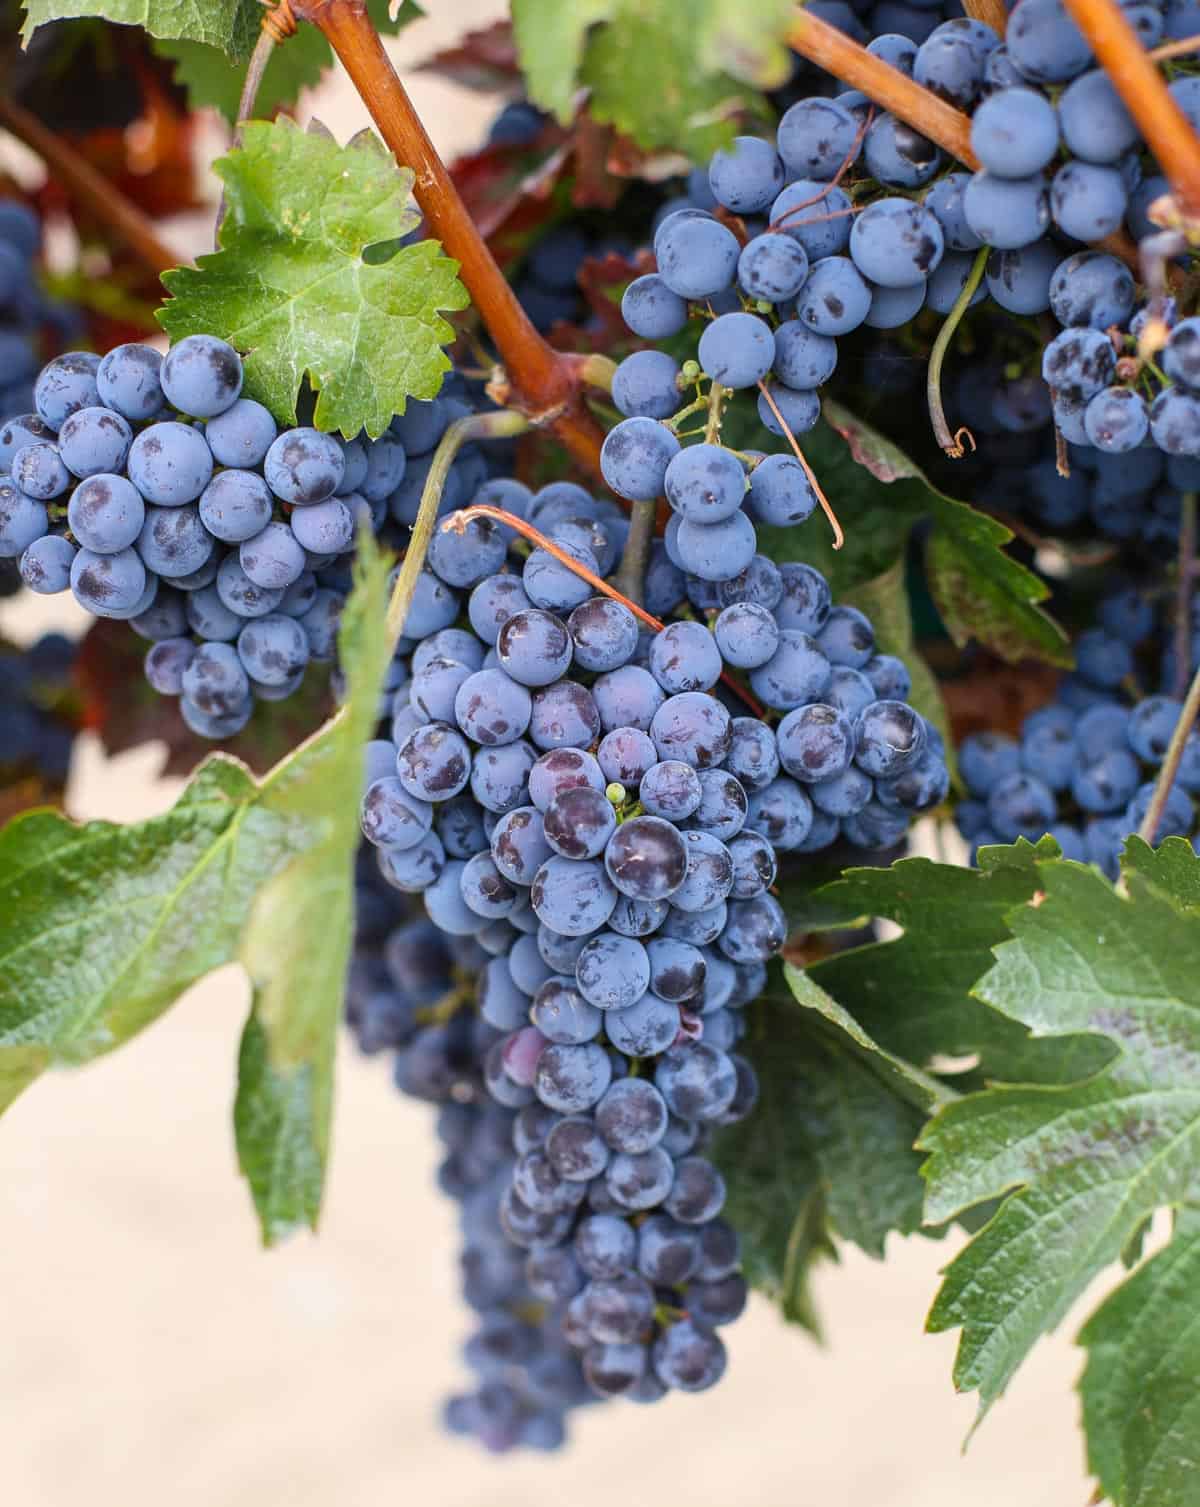 Fully ripe wine grapes hanging on a vine
